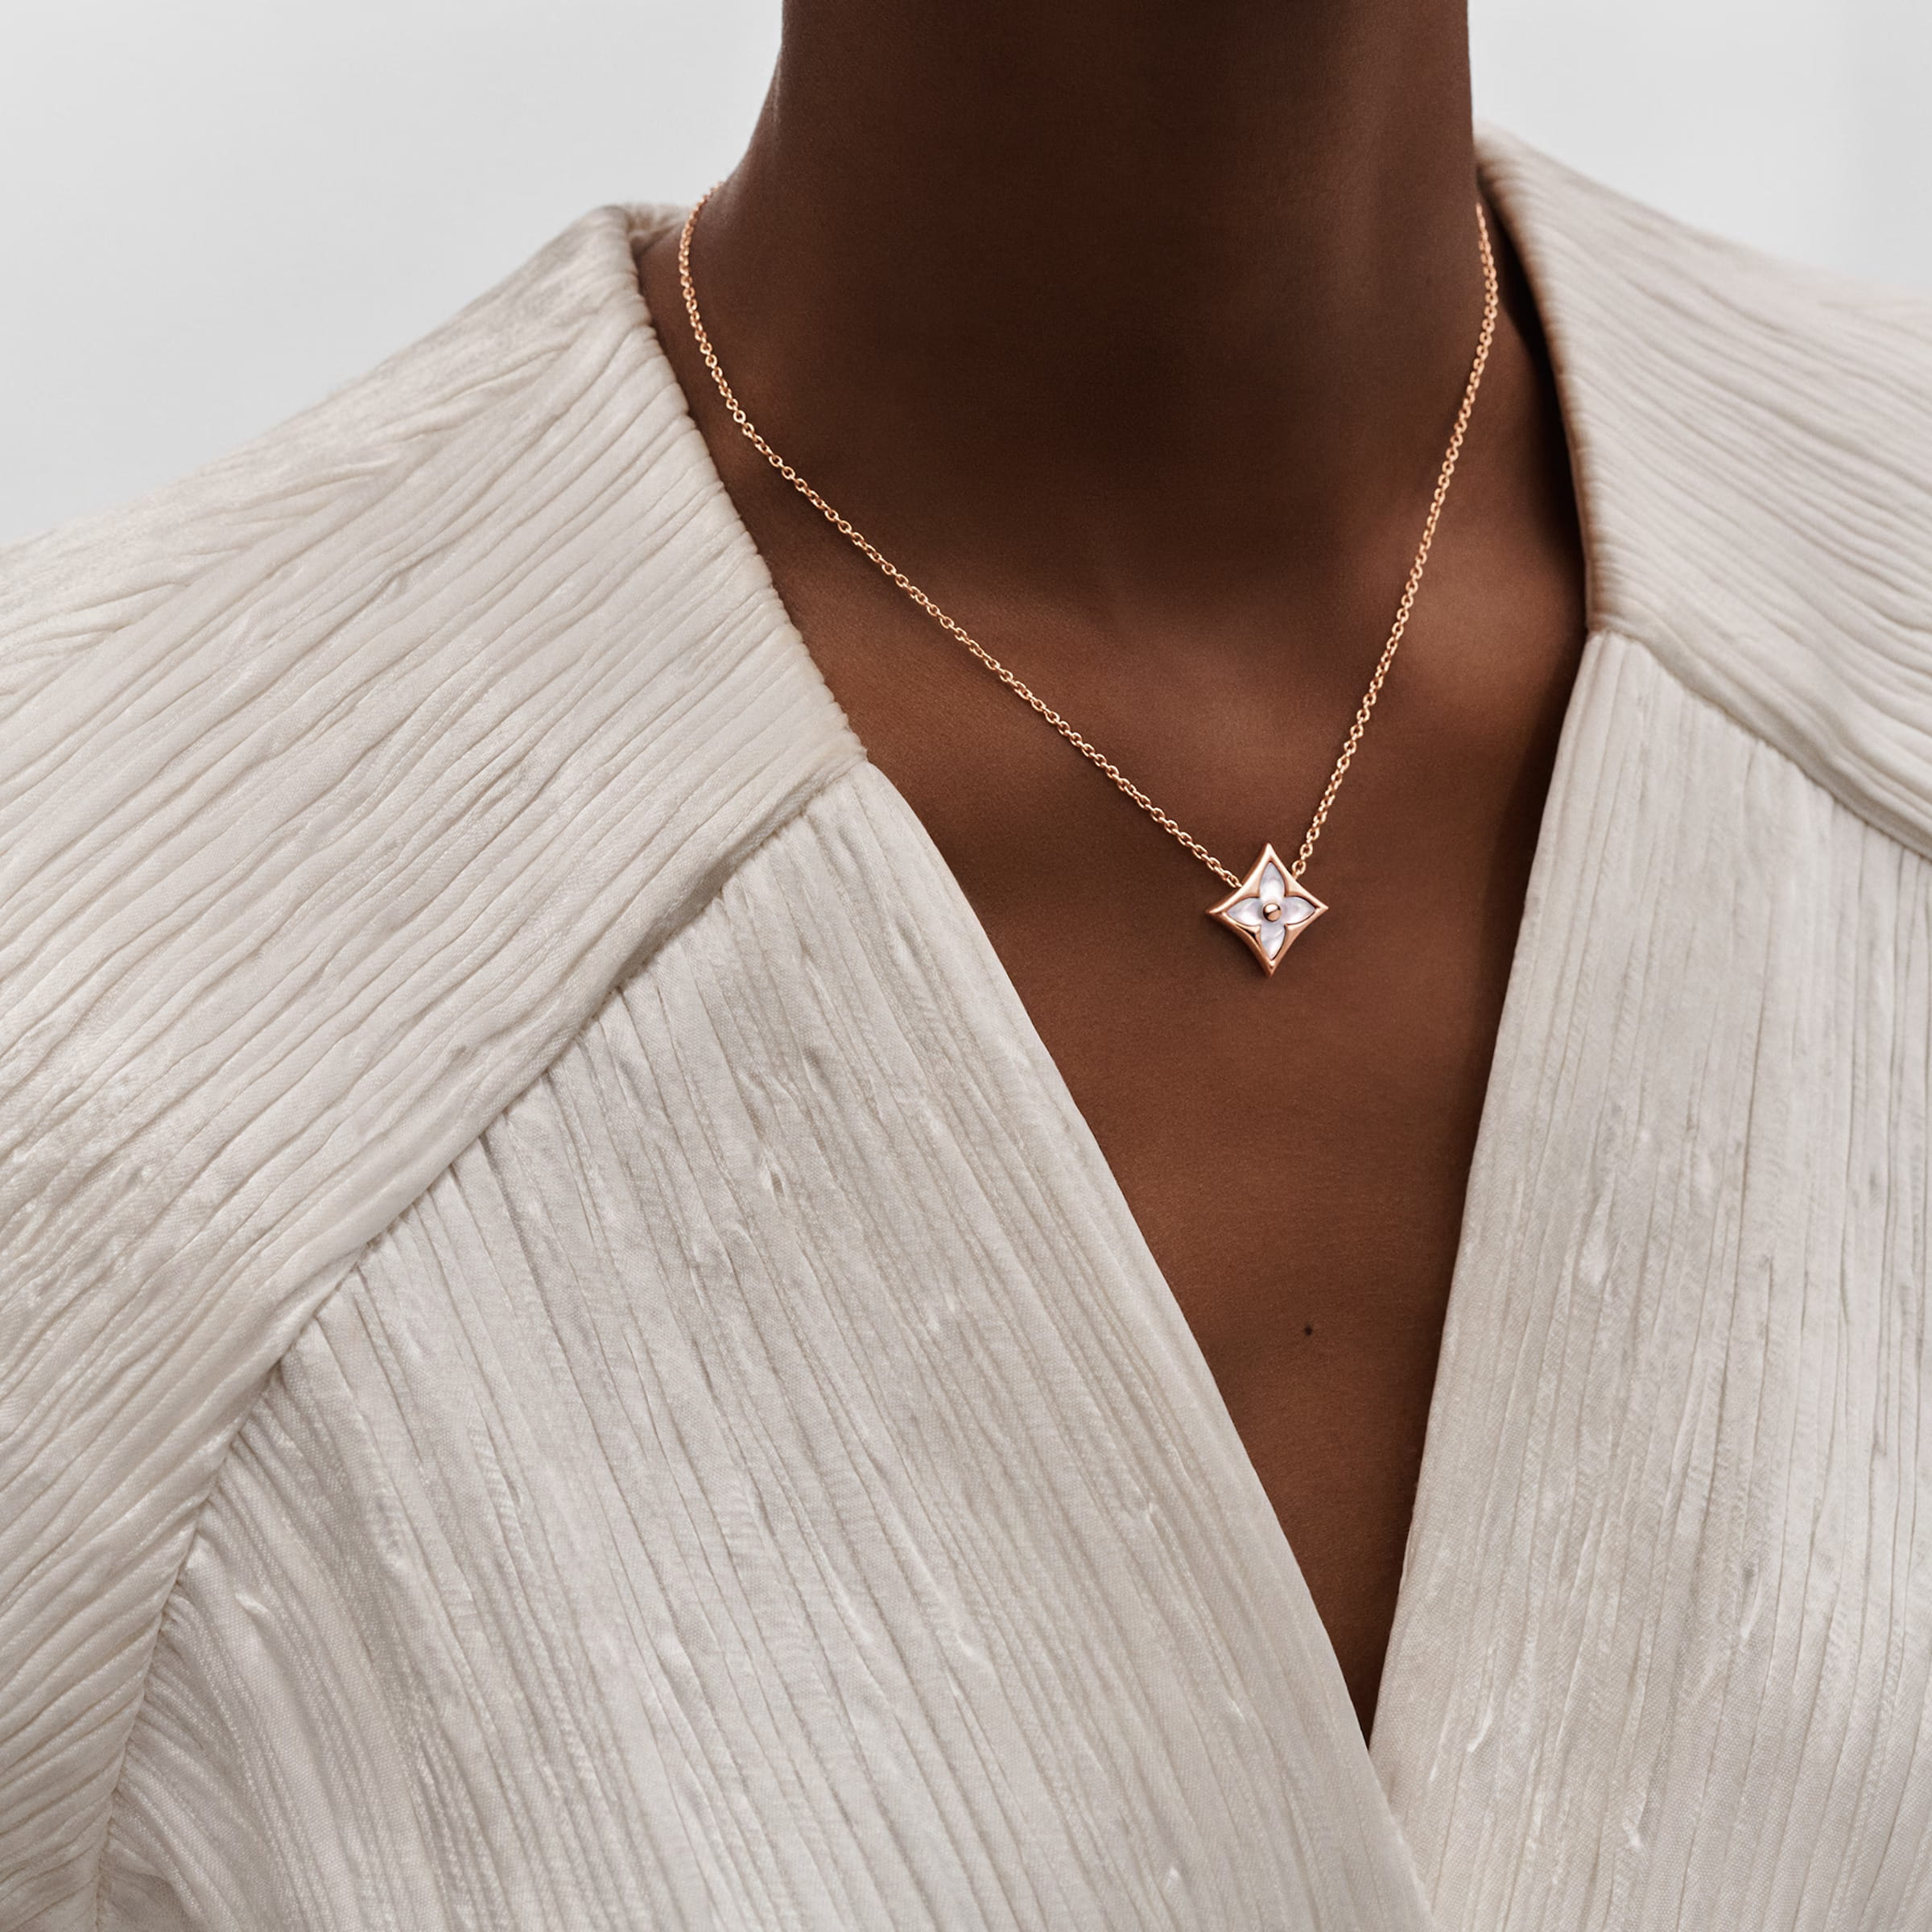 DÂY CHUYỀN LV LOUIS VUITTON COLOR BLOSSOM STAR PENDANT PINK GOLD AND WHITE MOTHER-OF-PEARL Q93521 2